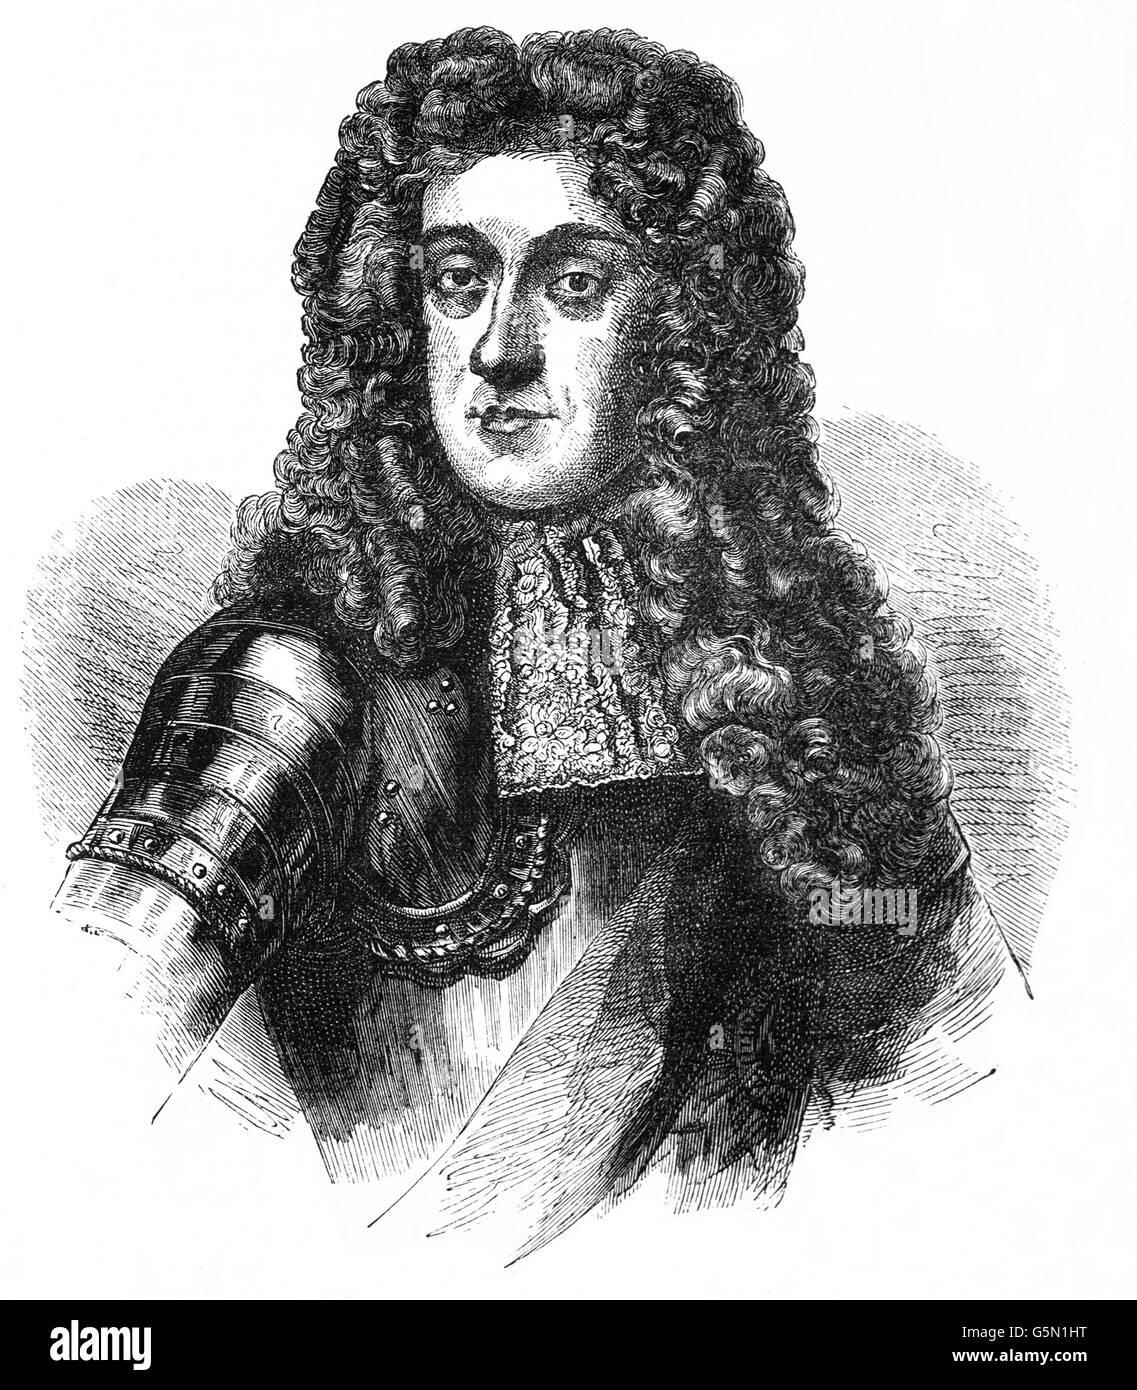 James II and VII (1633 -1701) was King of England and Ireland as James II and King of Scotland as James VII, until he was deposed in the Glorious Revolution of 1688. He was the last Roman Catholic monarch to reign over the Kingdoms of England, Scotland and Ireland. Stock Photo